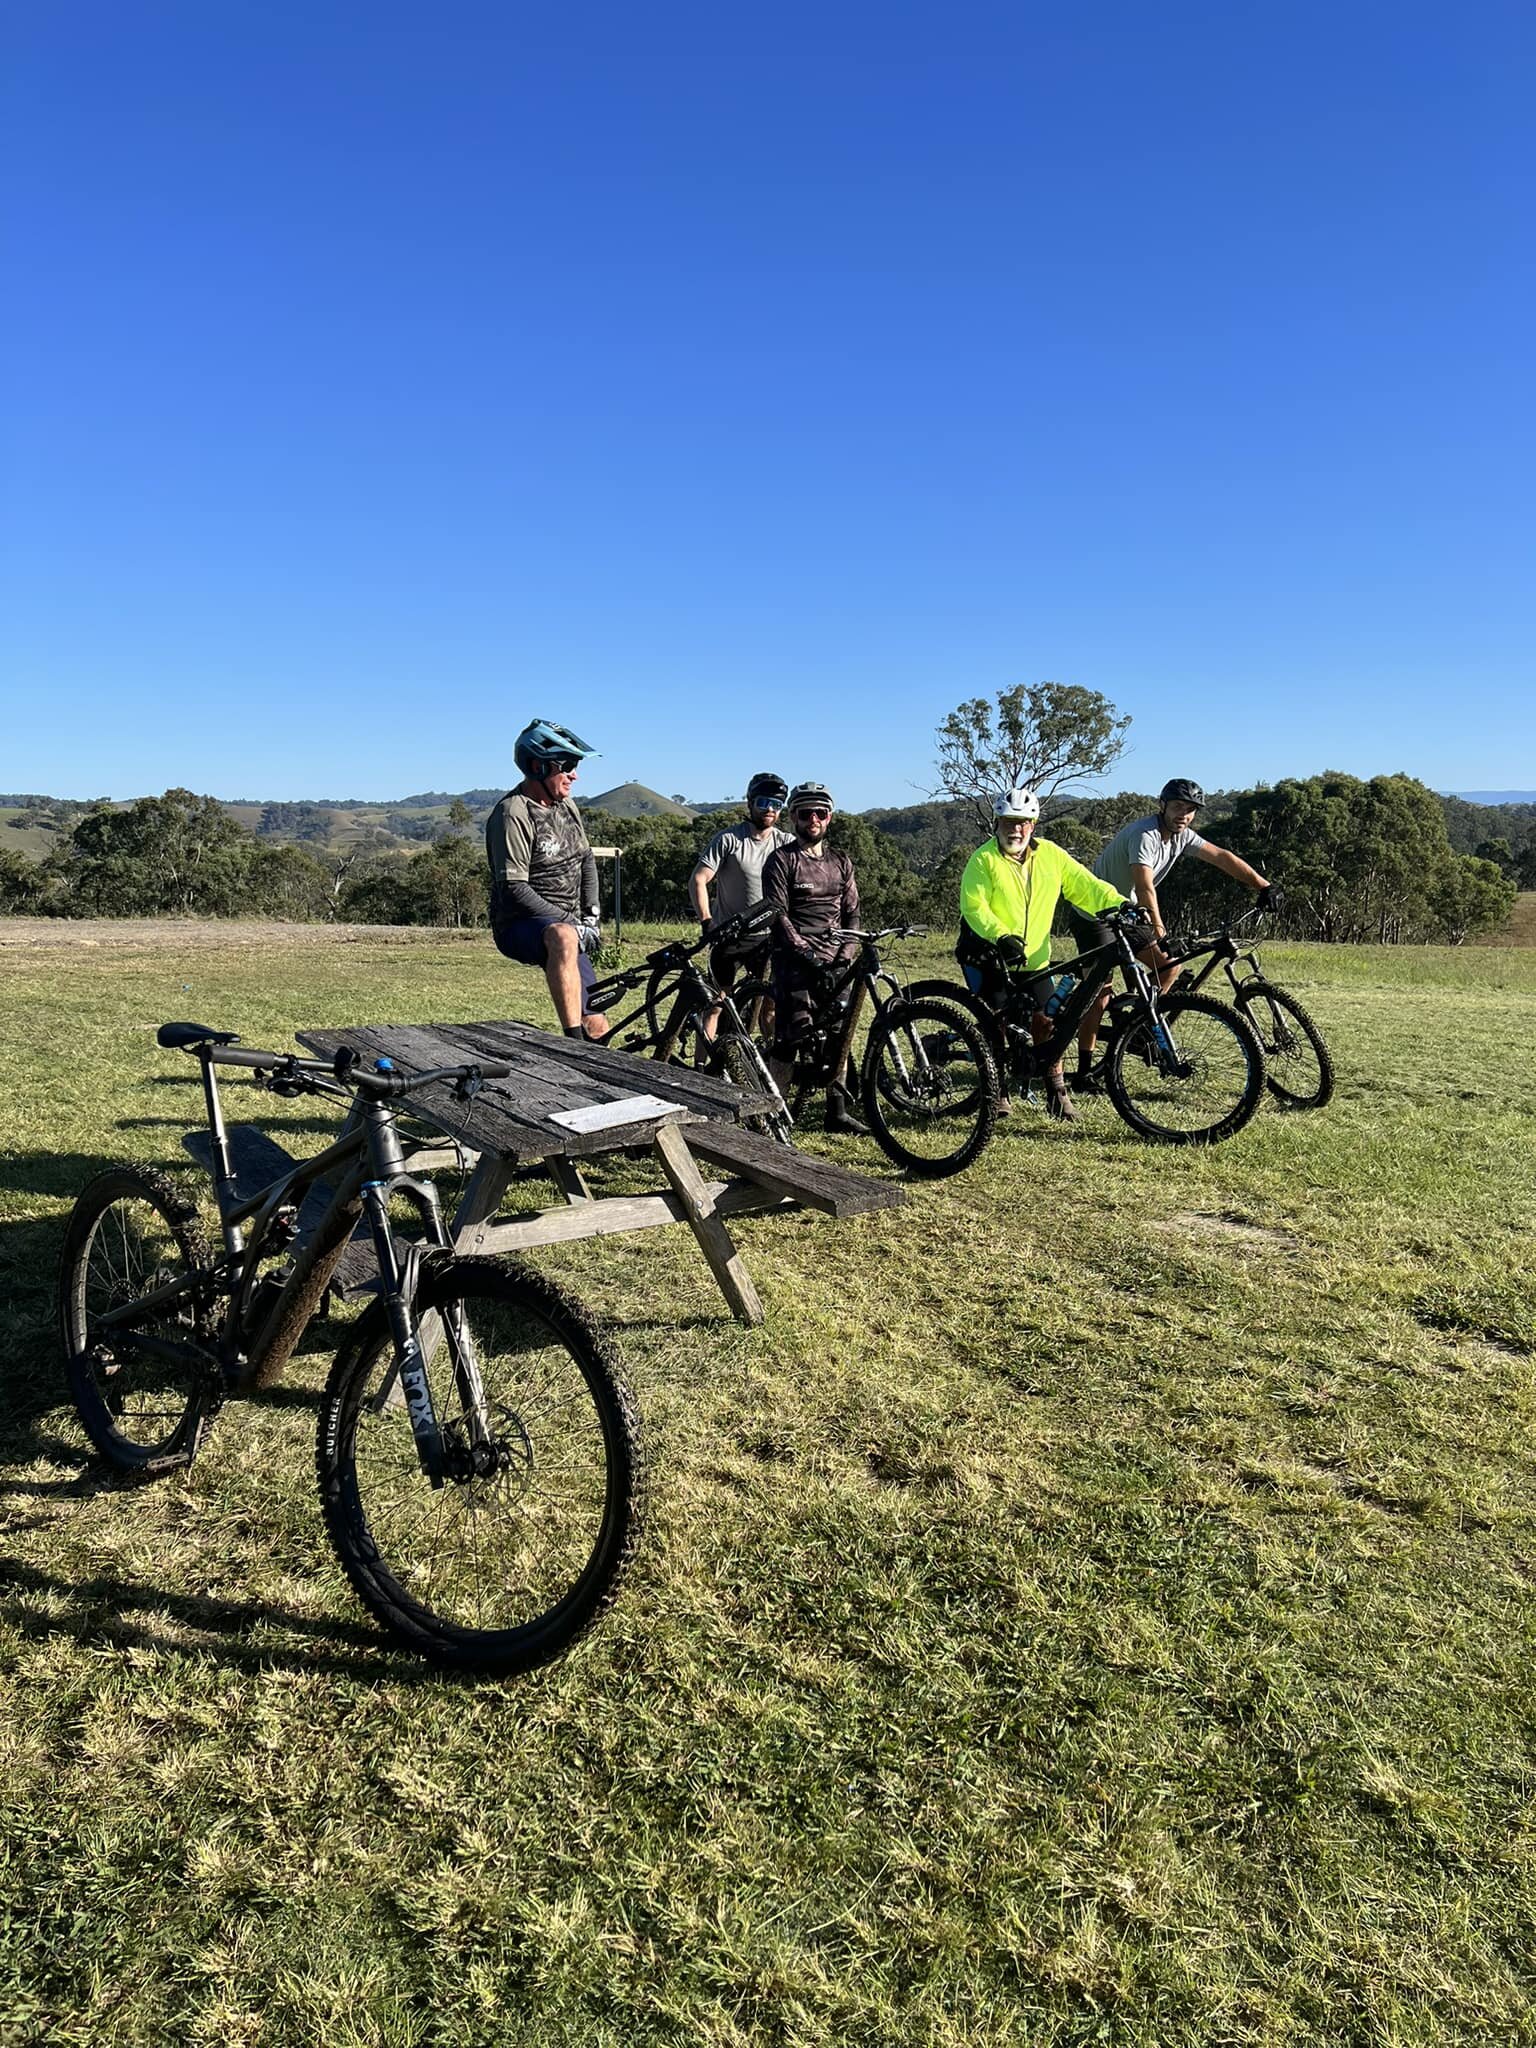 What an awesome day for a pedal. Get out there people.
#ridedungog,#grantedridesmountainbike, #epicdirt